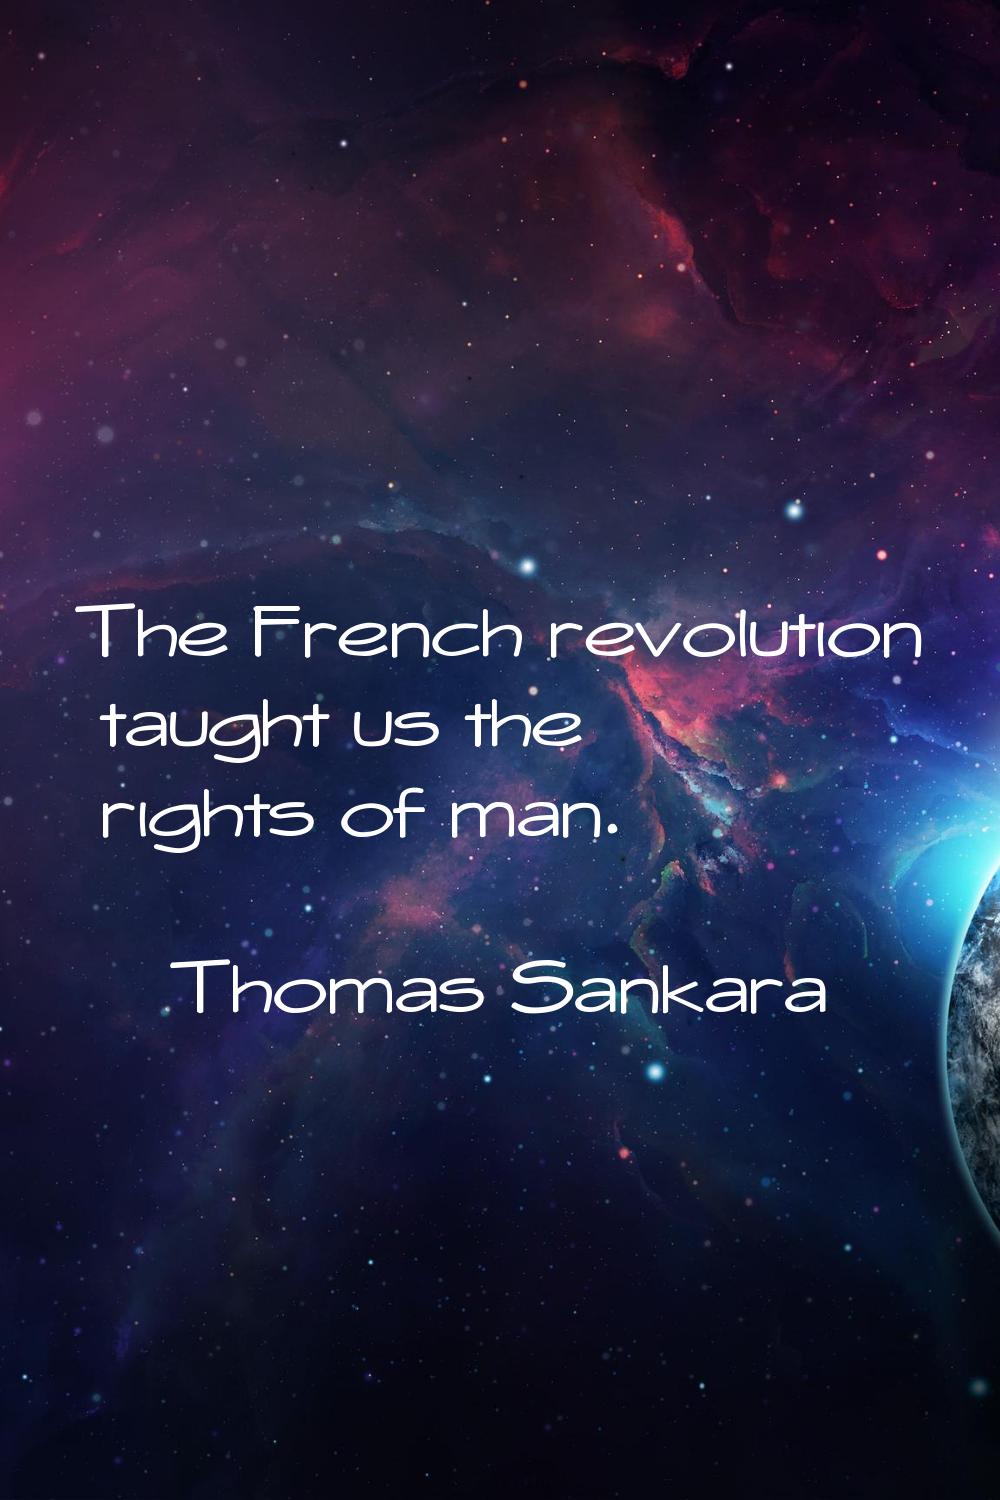 The French revolution taught us the rights of man.